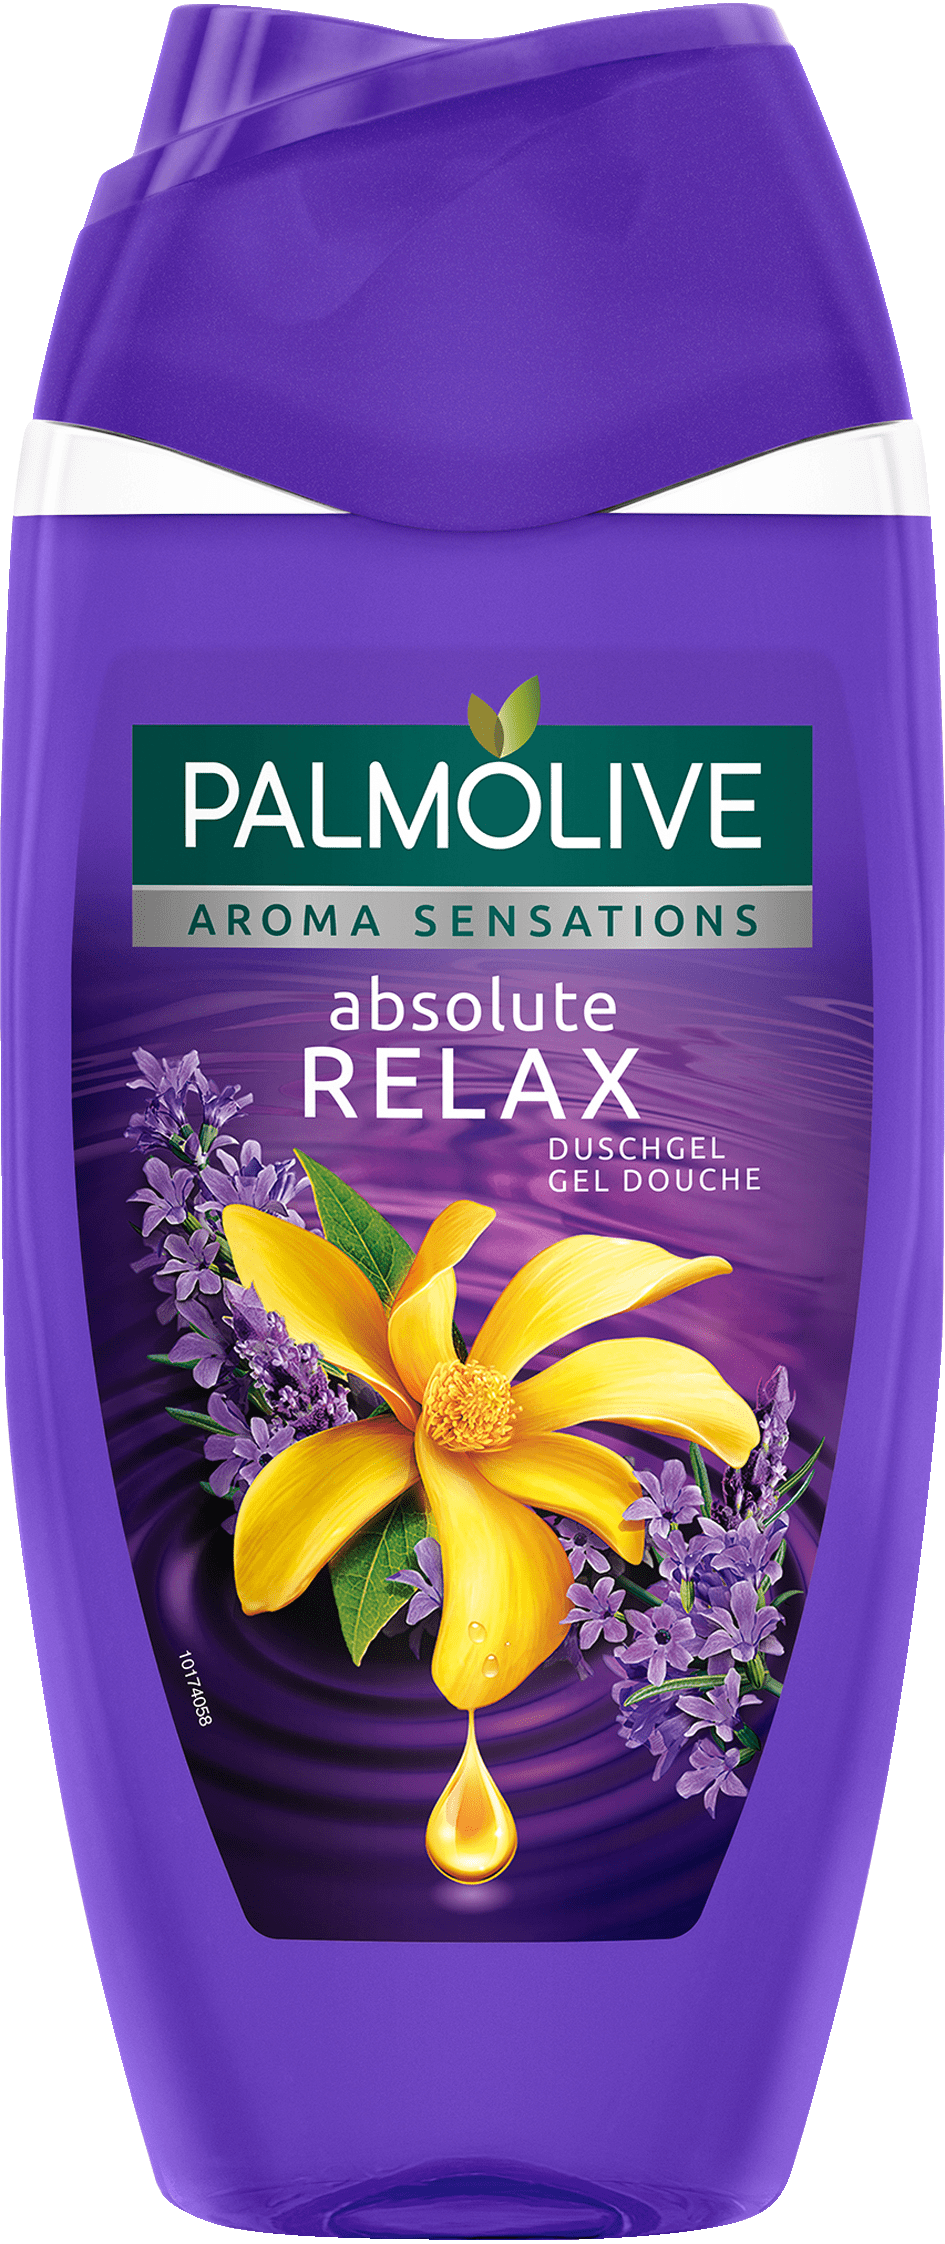 Absolute Sensations Of Relax, Forwarder Ml 250 Shower Gel Honest Aroma Palmolive |